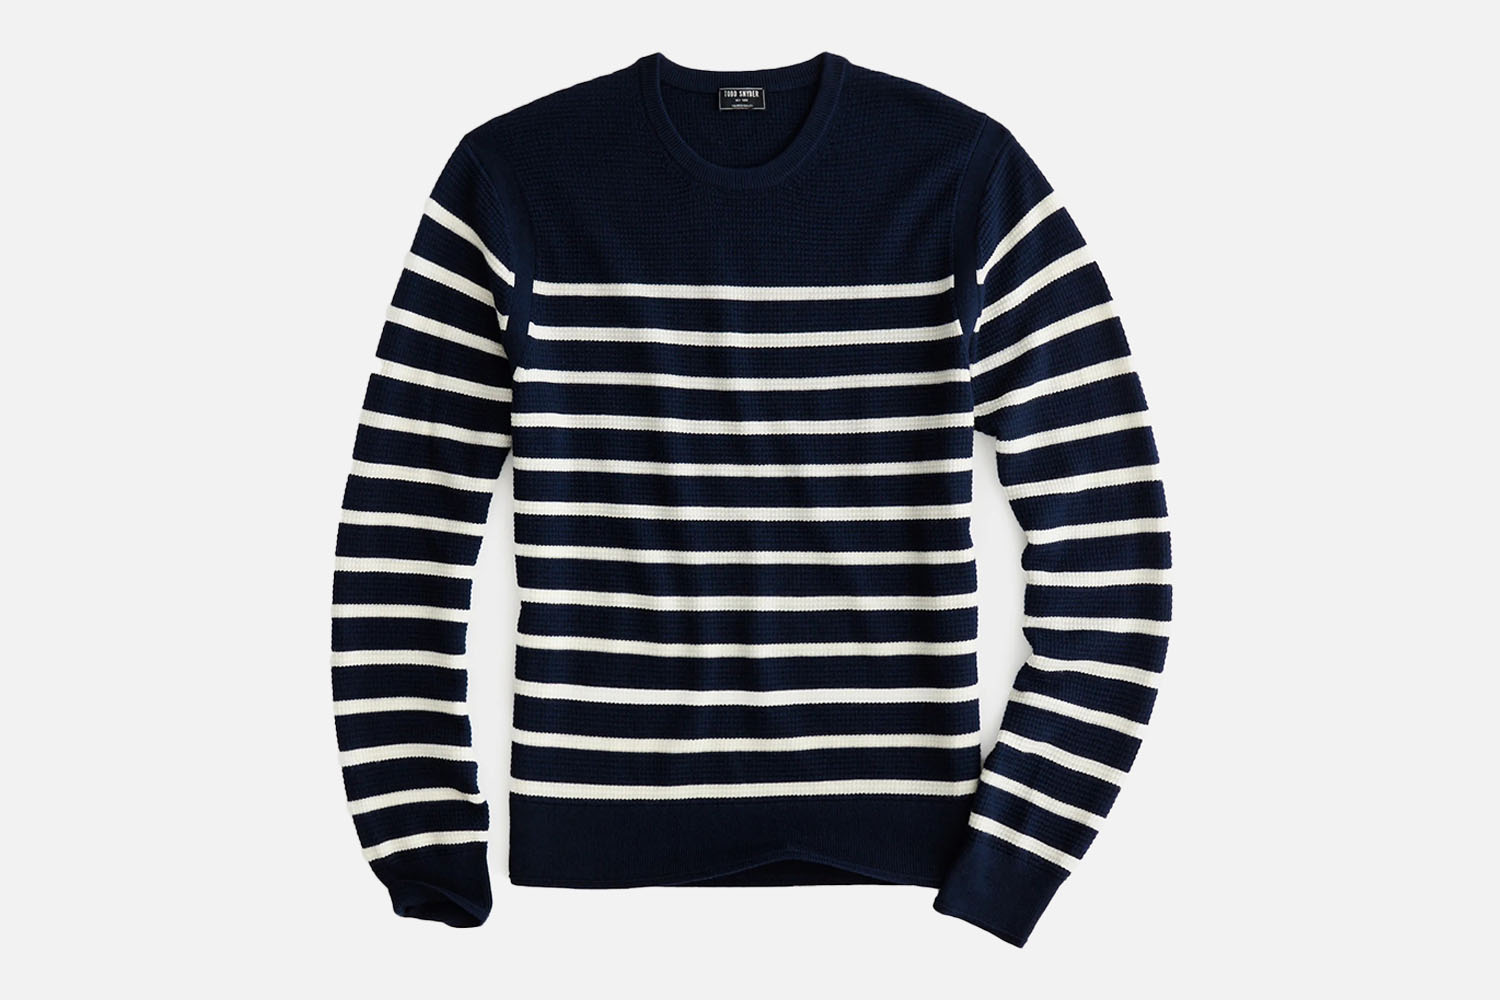 Save $79 On This Classic Merino Striped Sweater